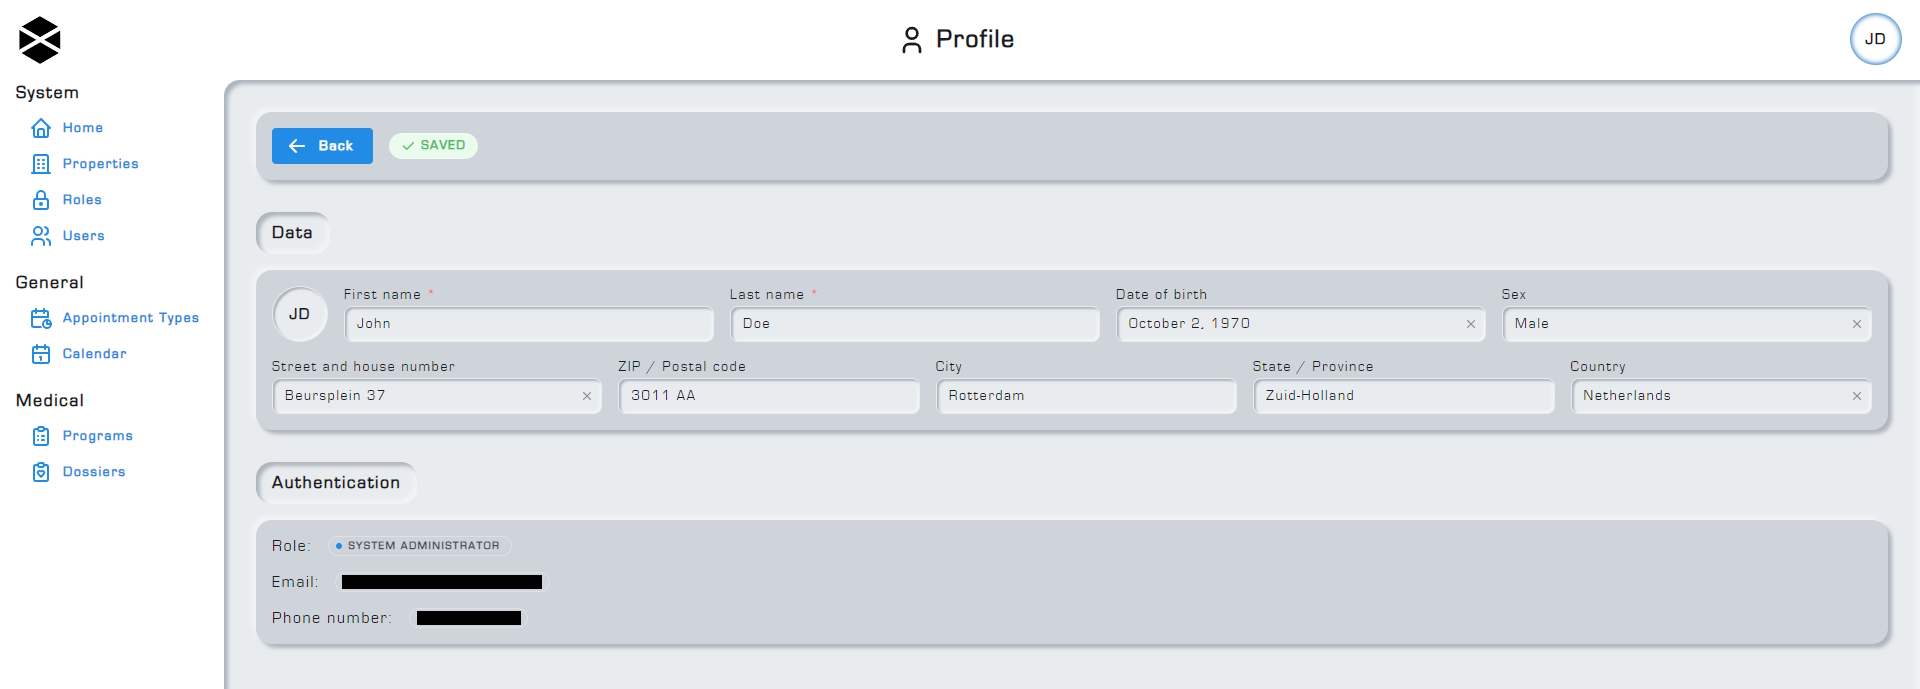 Profile page overview